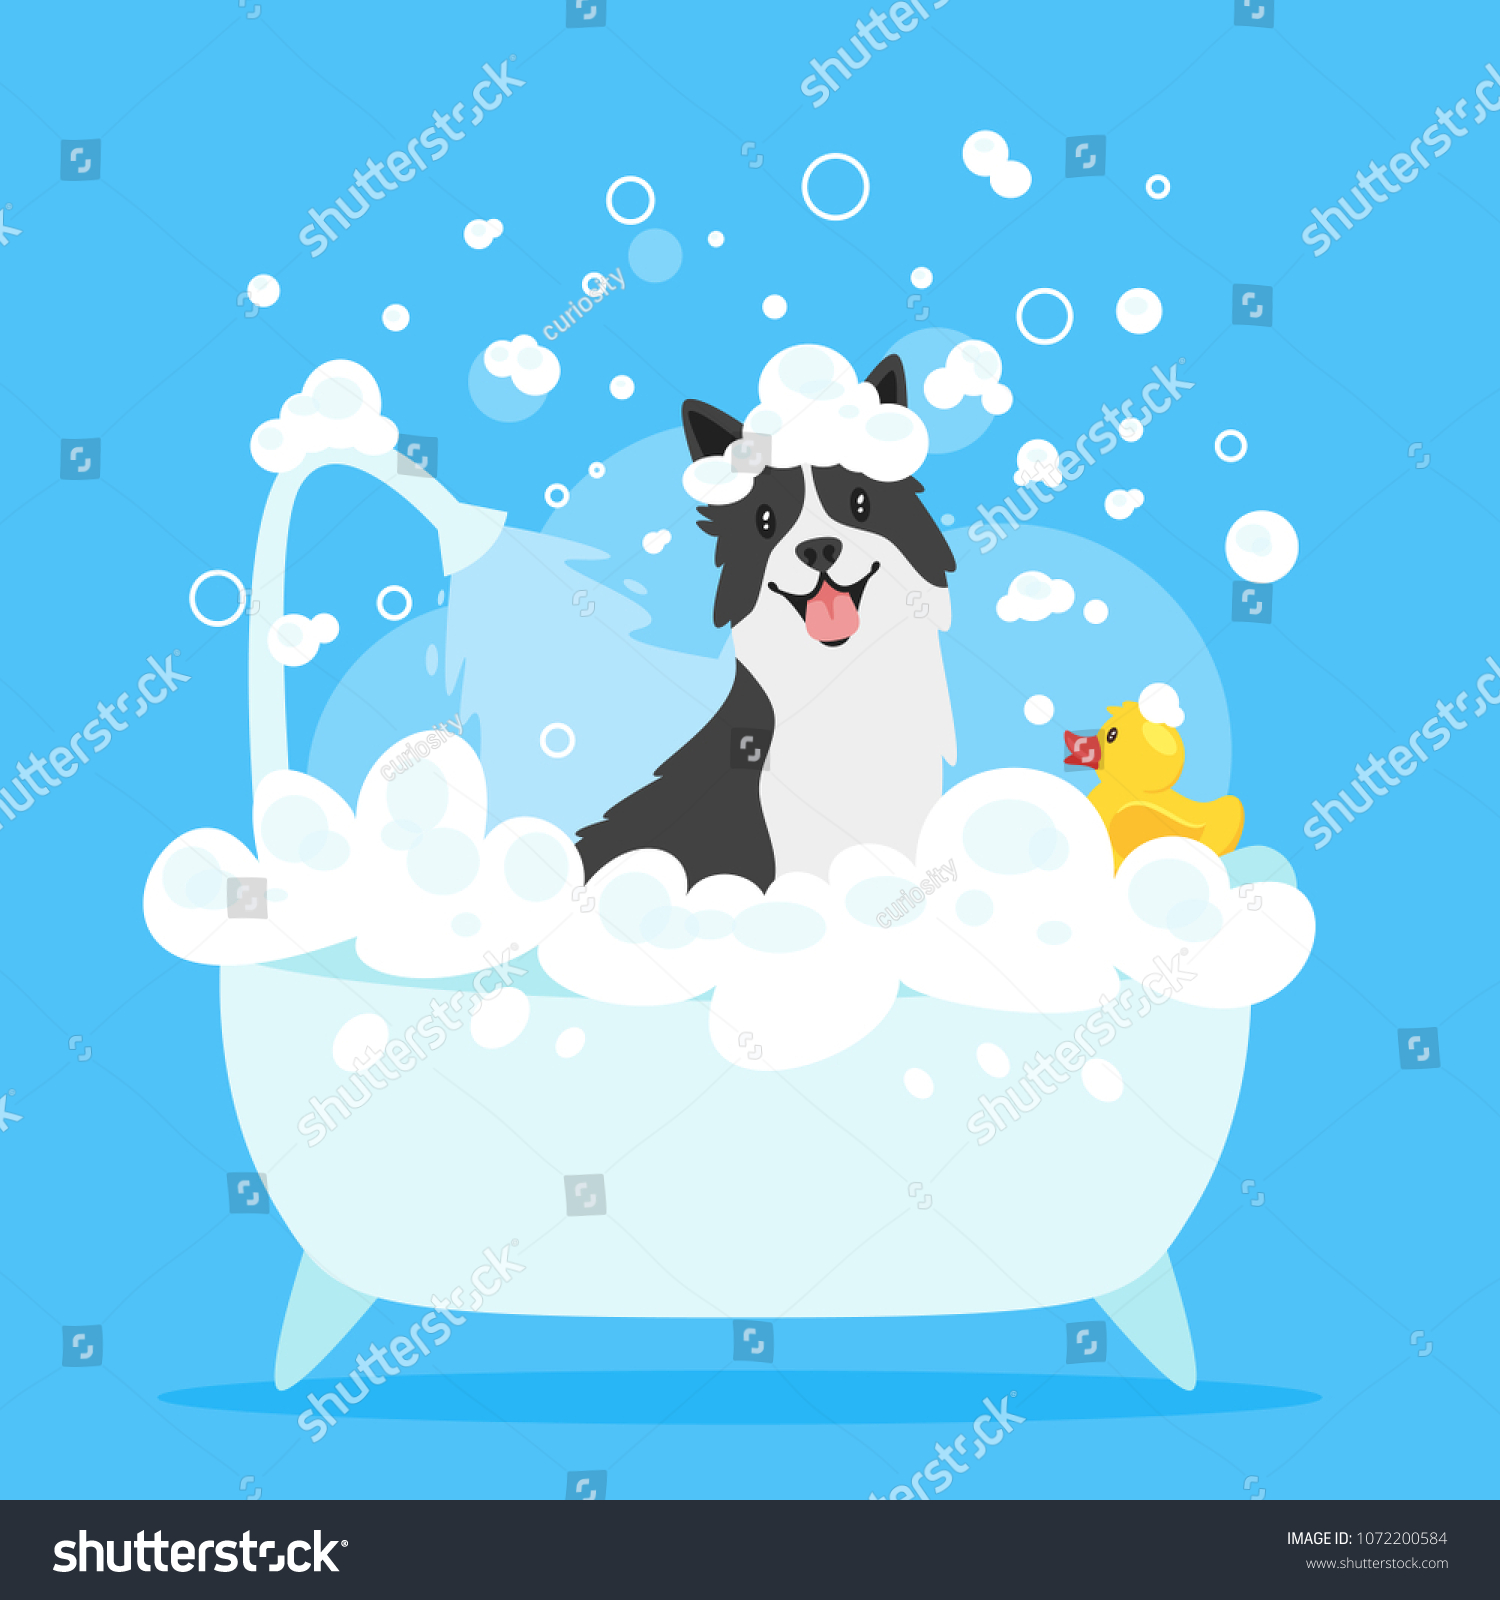 SVG of Vector cartoon style illustration of cute border collie dog taking a bath full of soap foam. Yellow rubber duck in bathtub. Grooming concept. Blue background. svg